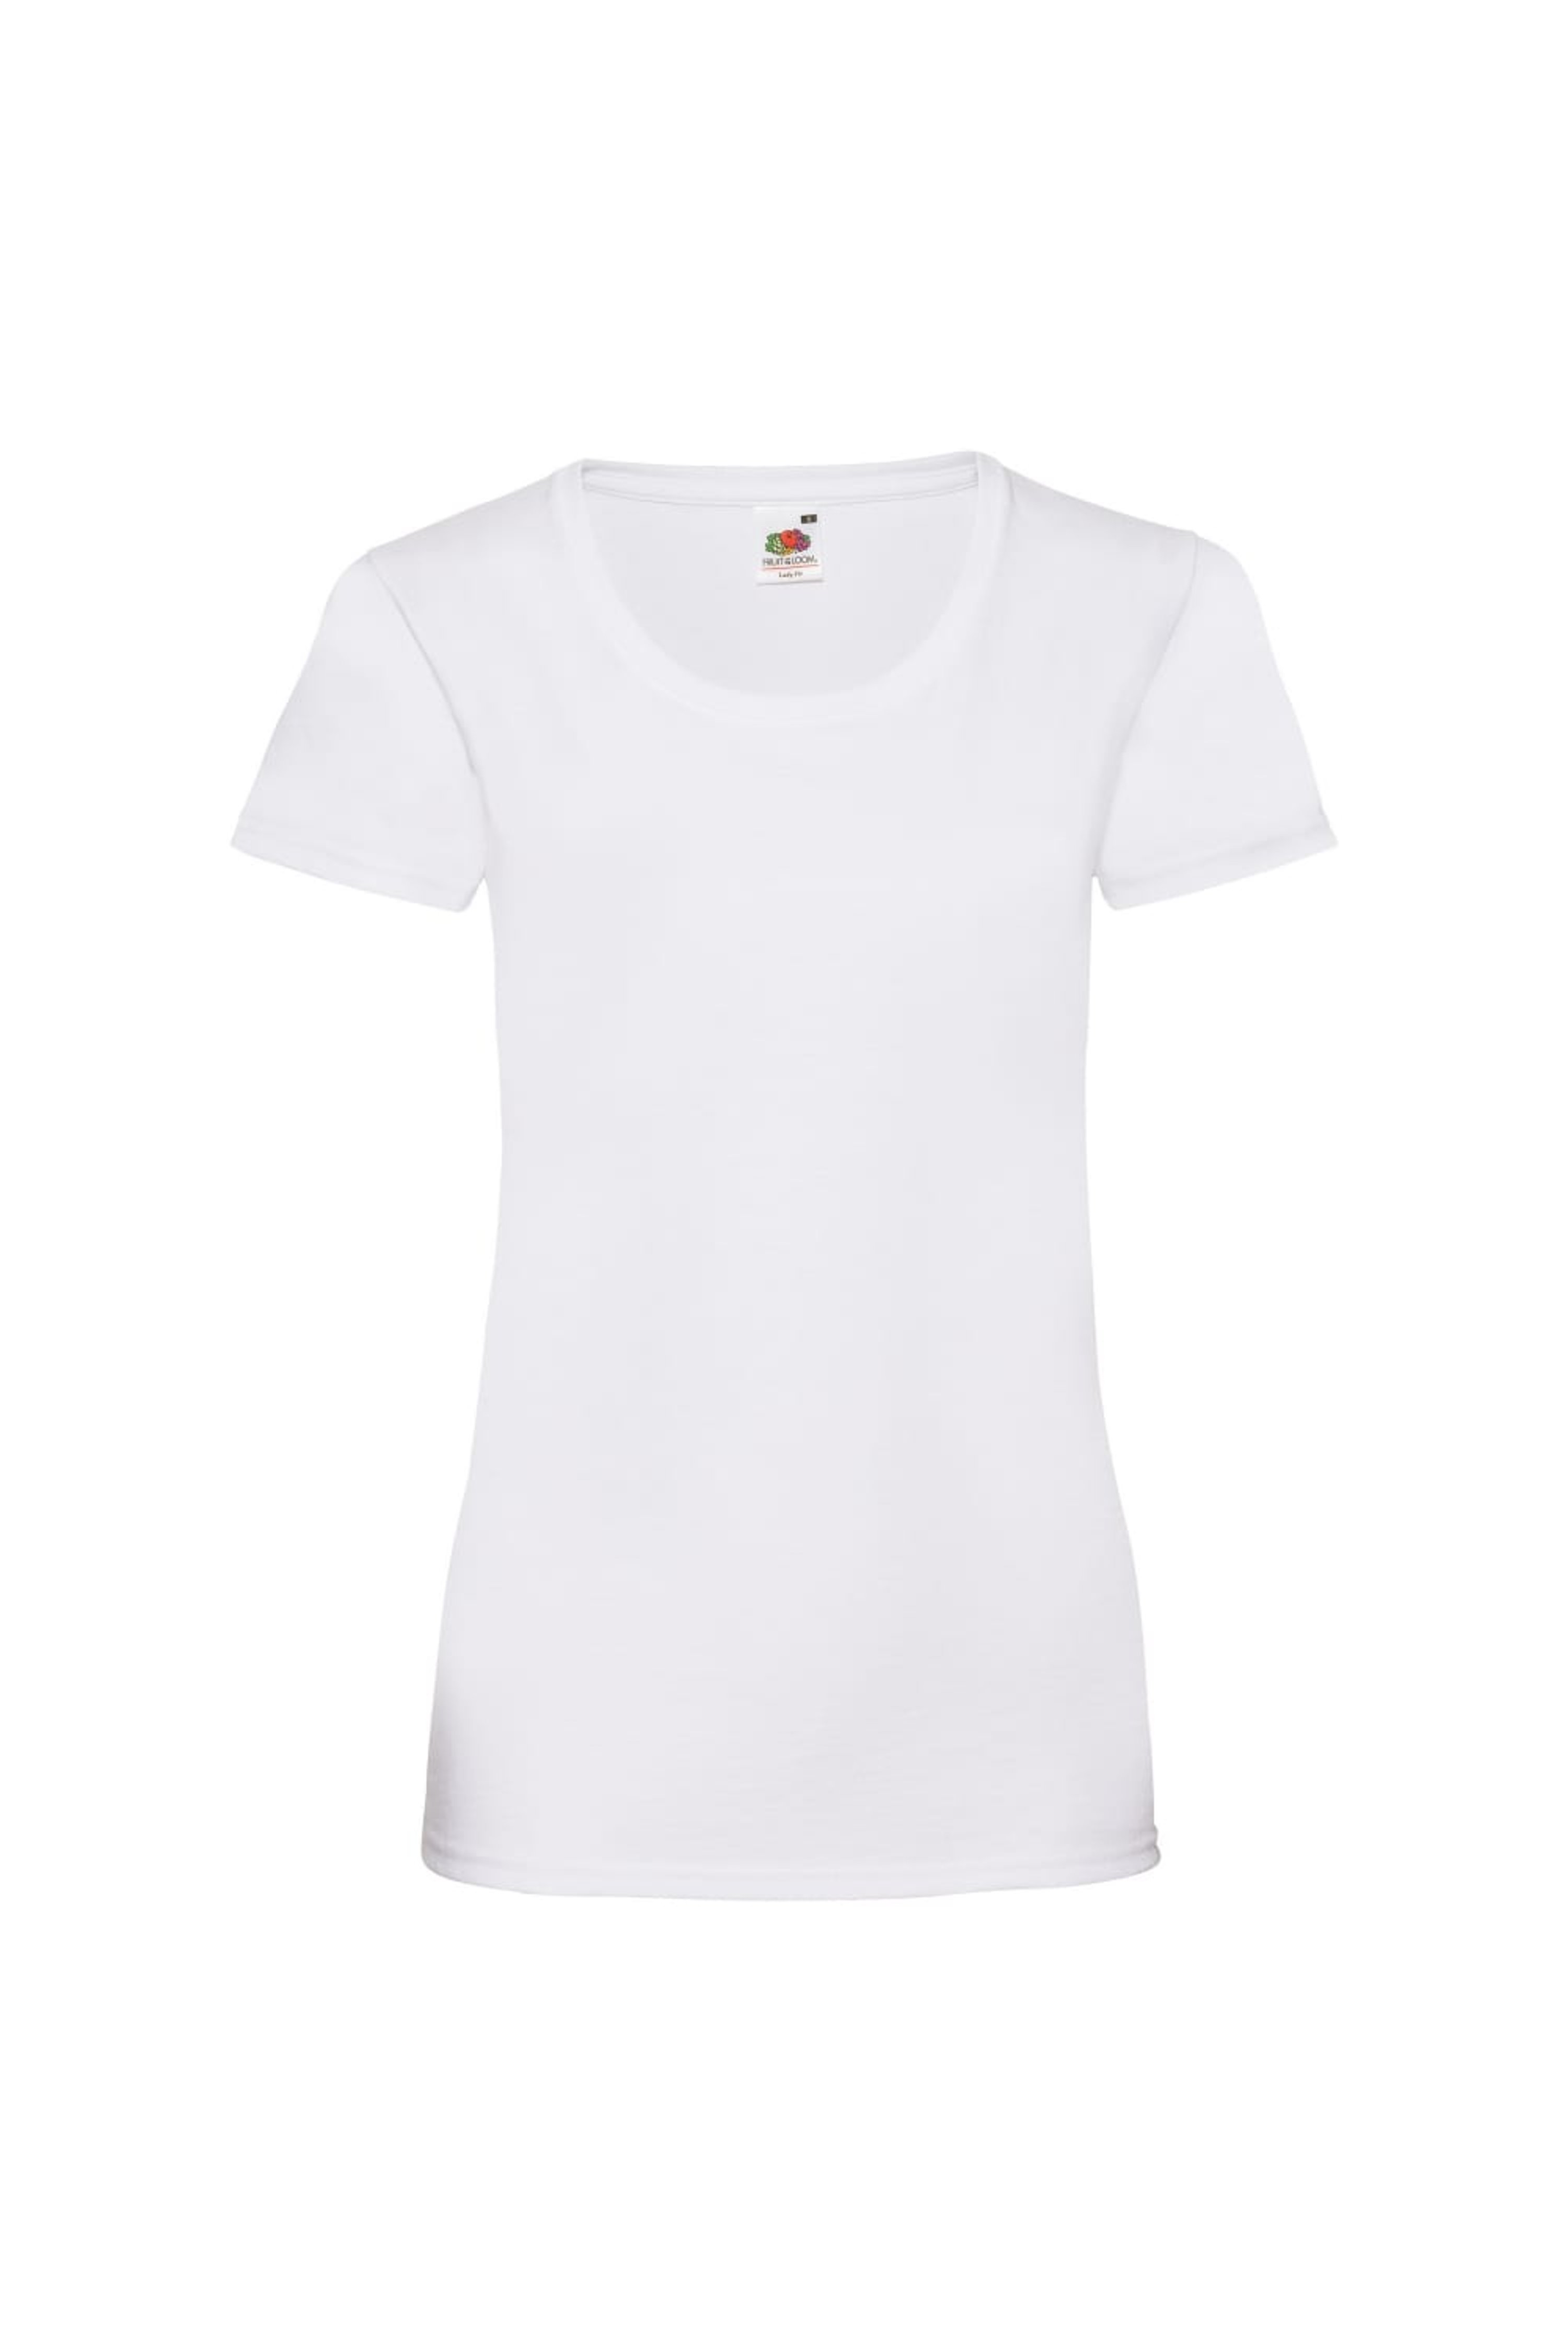 FRUIT OF THE LOOM FRUIT OF THE LOOM LADIES/WOMENS LADY-FIT VALUEWEIGHT SHORT SLEEVE T-SHIRT